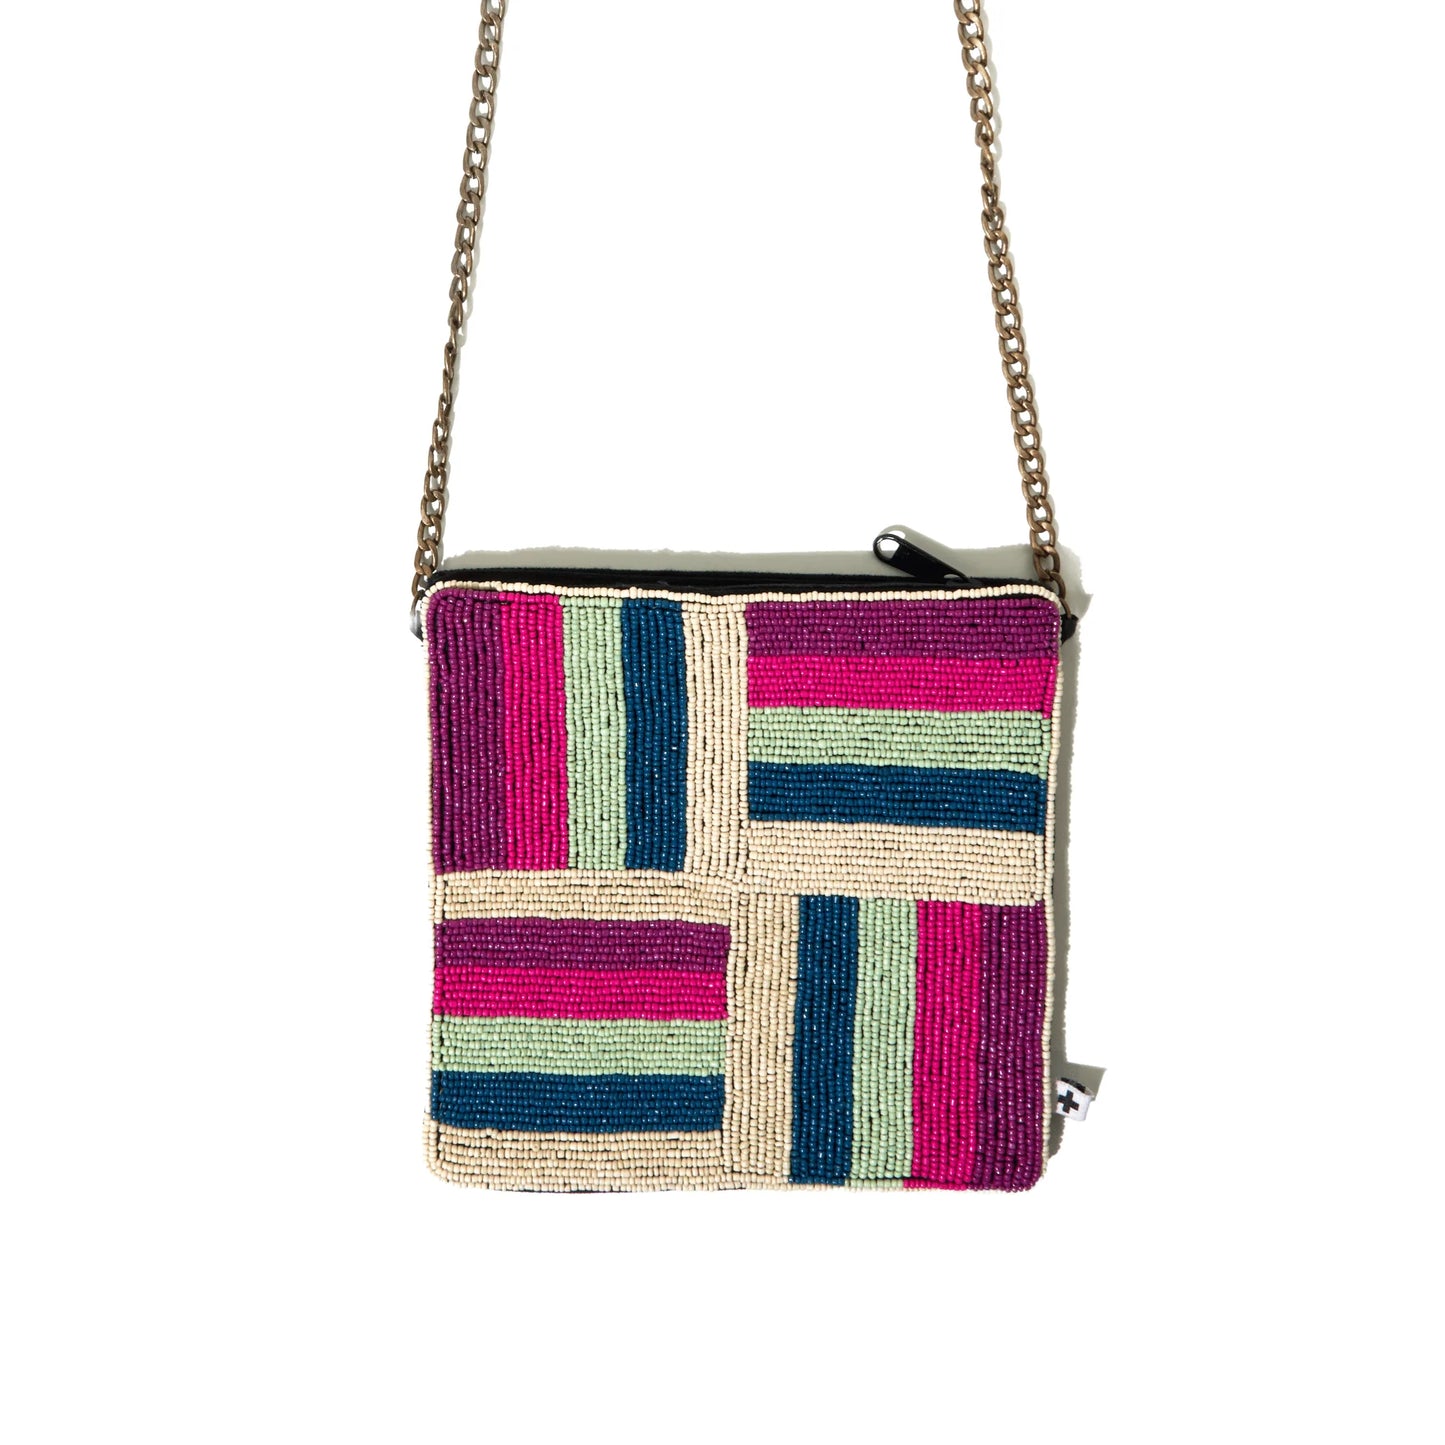 Magneta Hot Pink Mint Square Cross Body With Chain Strap